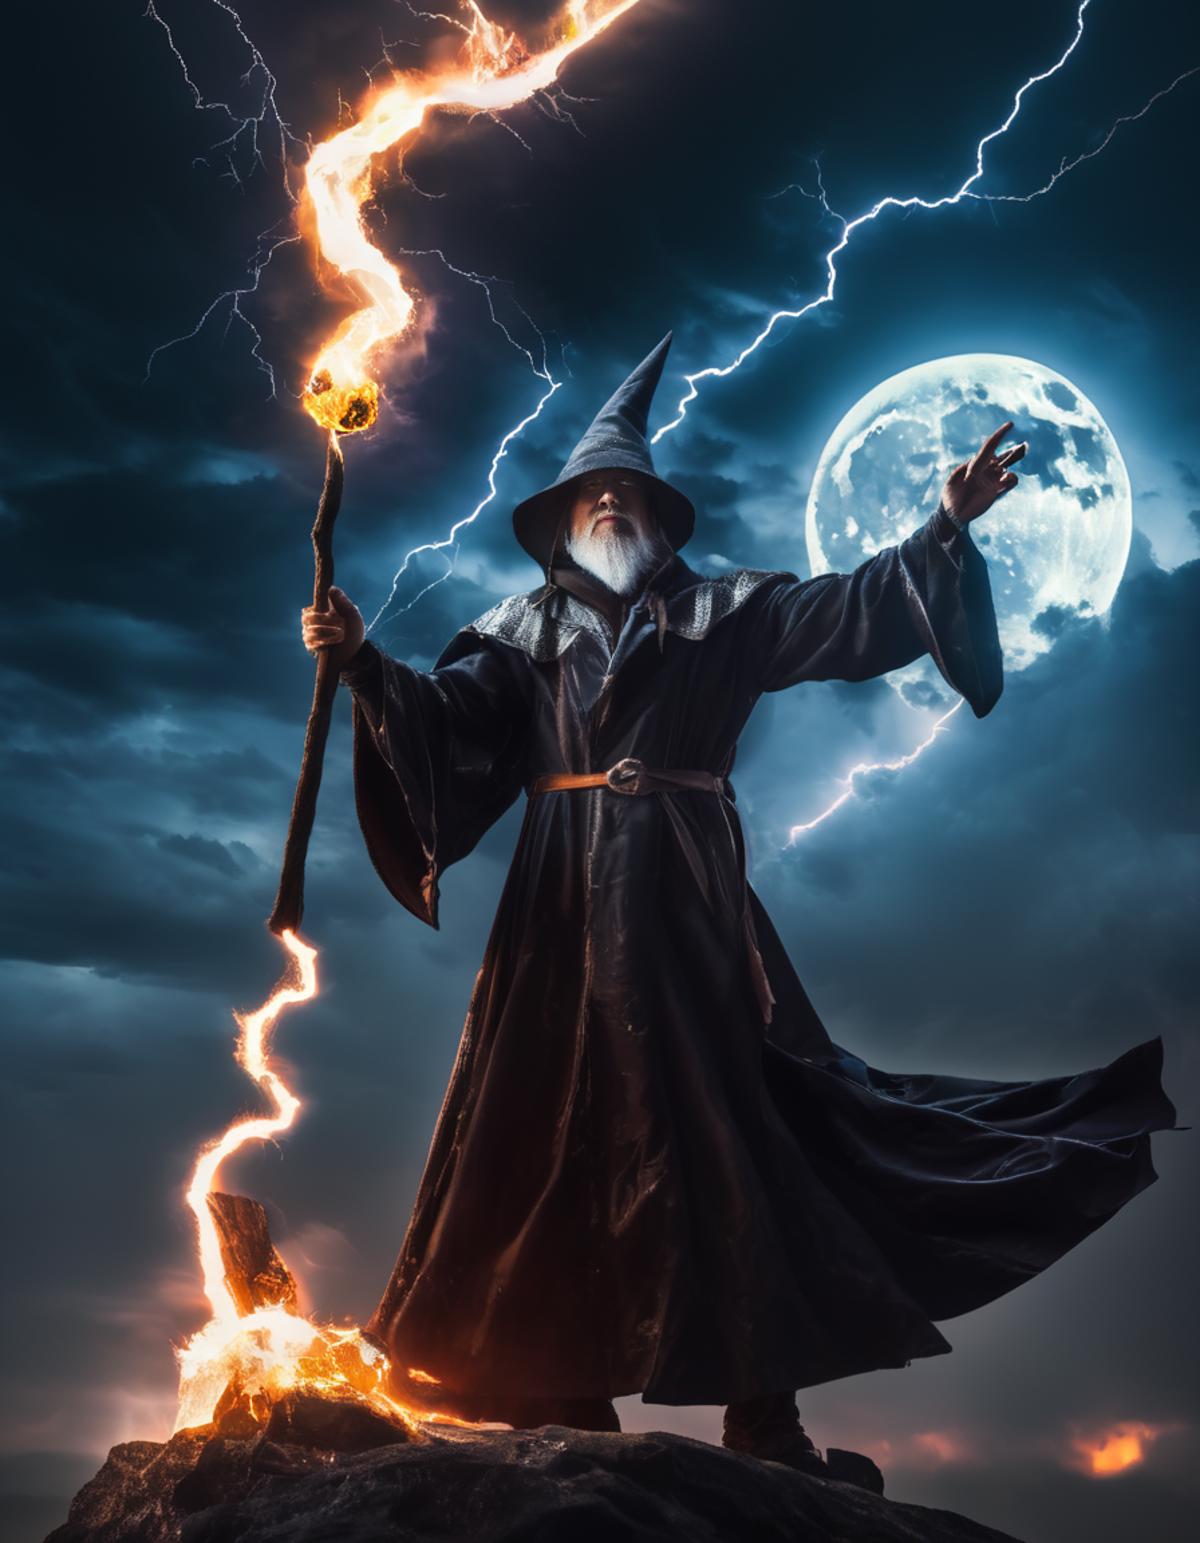 A man in a wizard's outfit holding a wand and a lightning bolt.